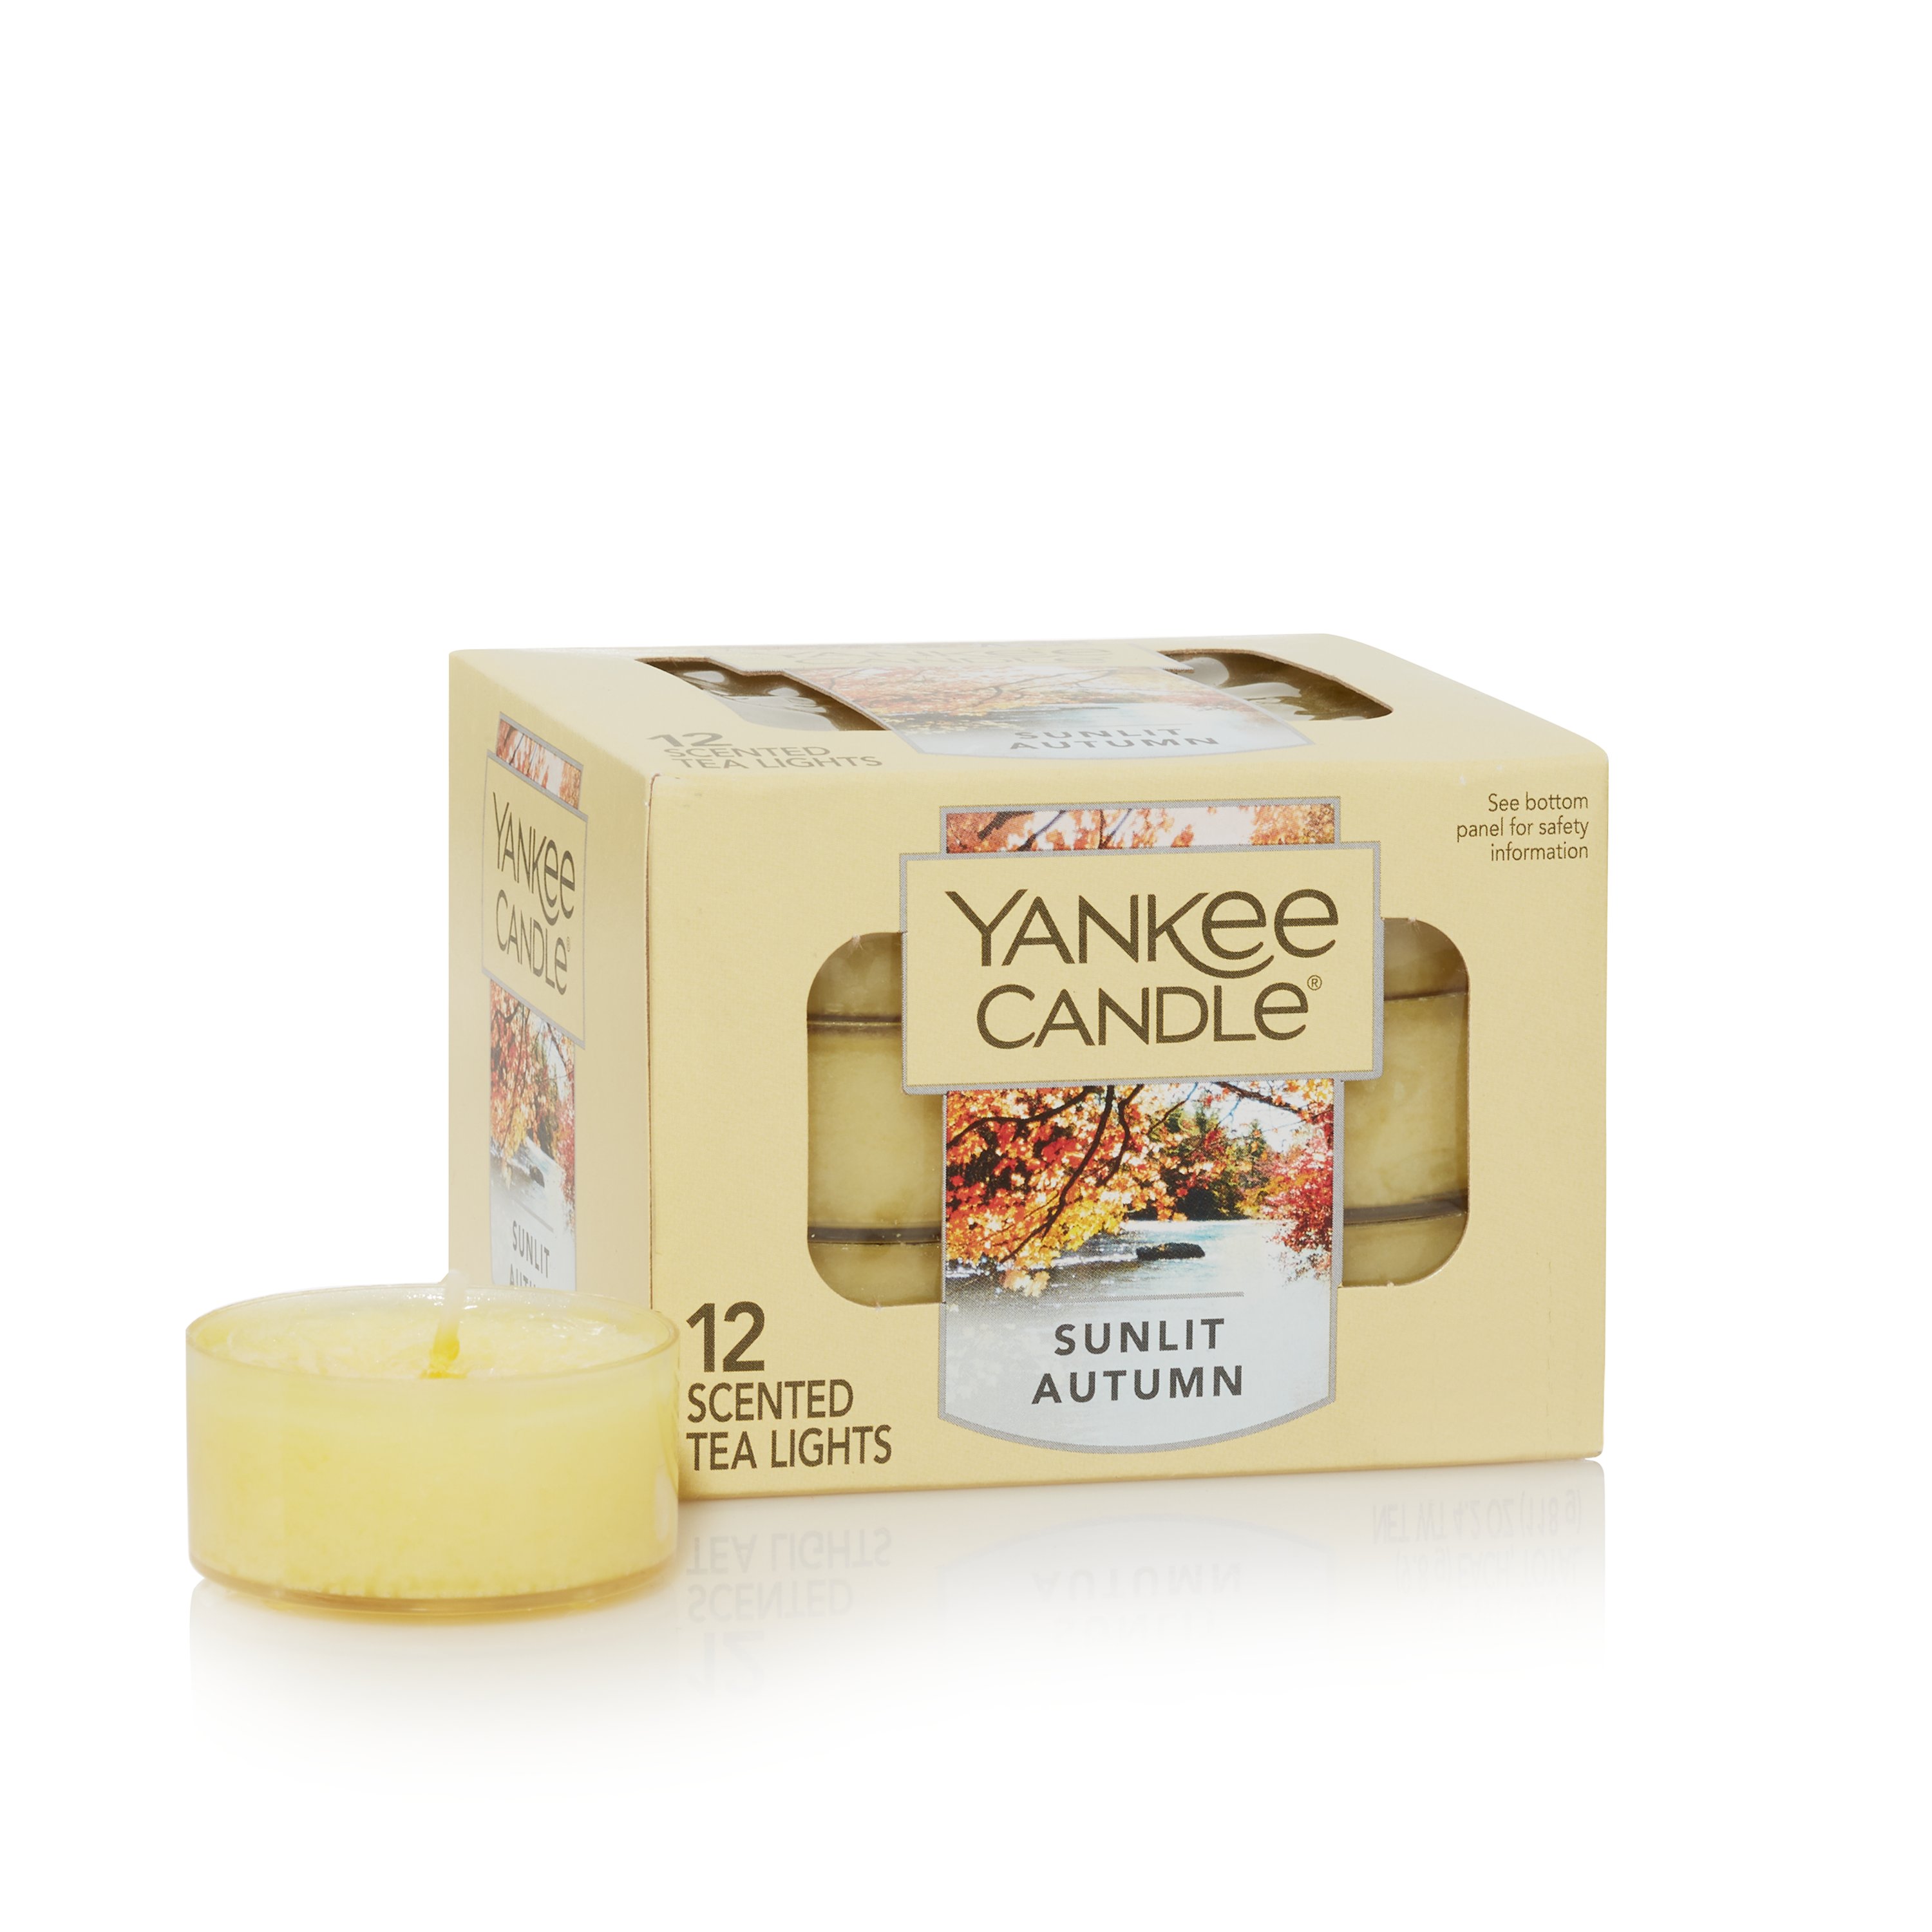 Yankee Candle 12 Scented Tea Light Lights Candles Candle Box Set Fragrance NEW 